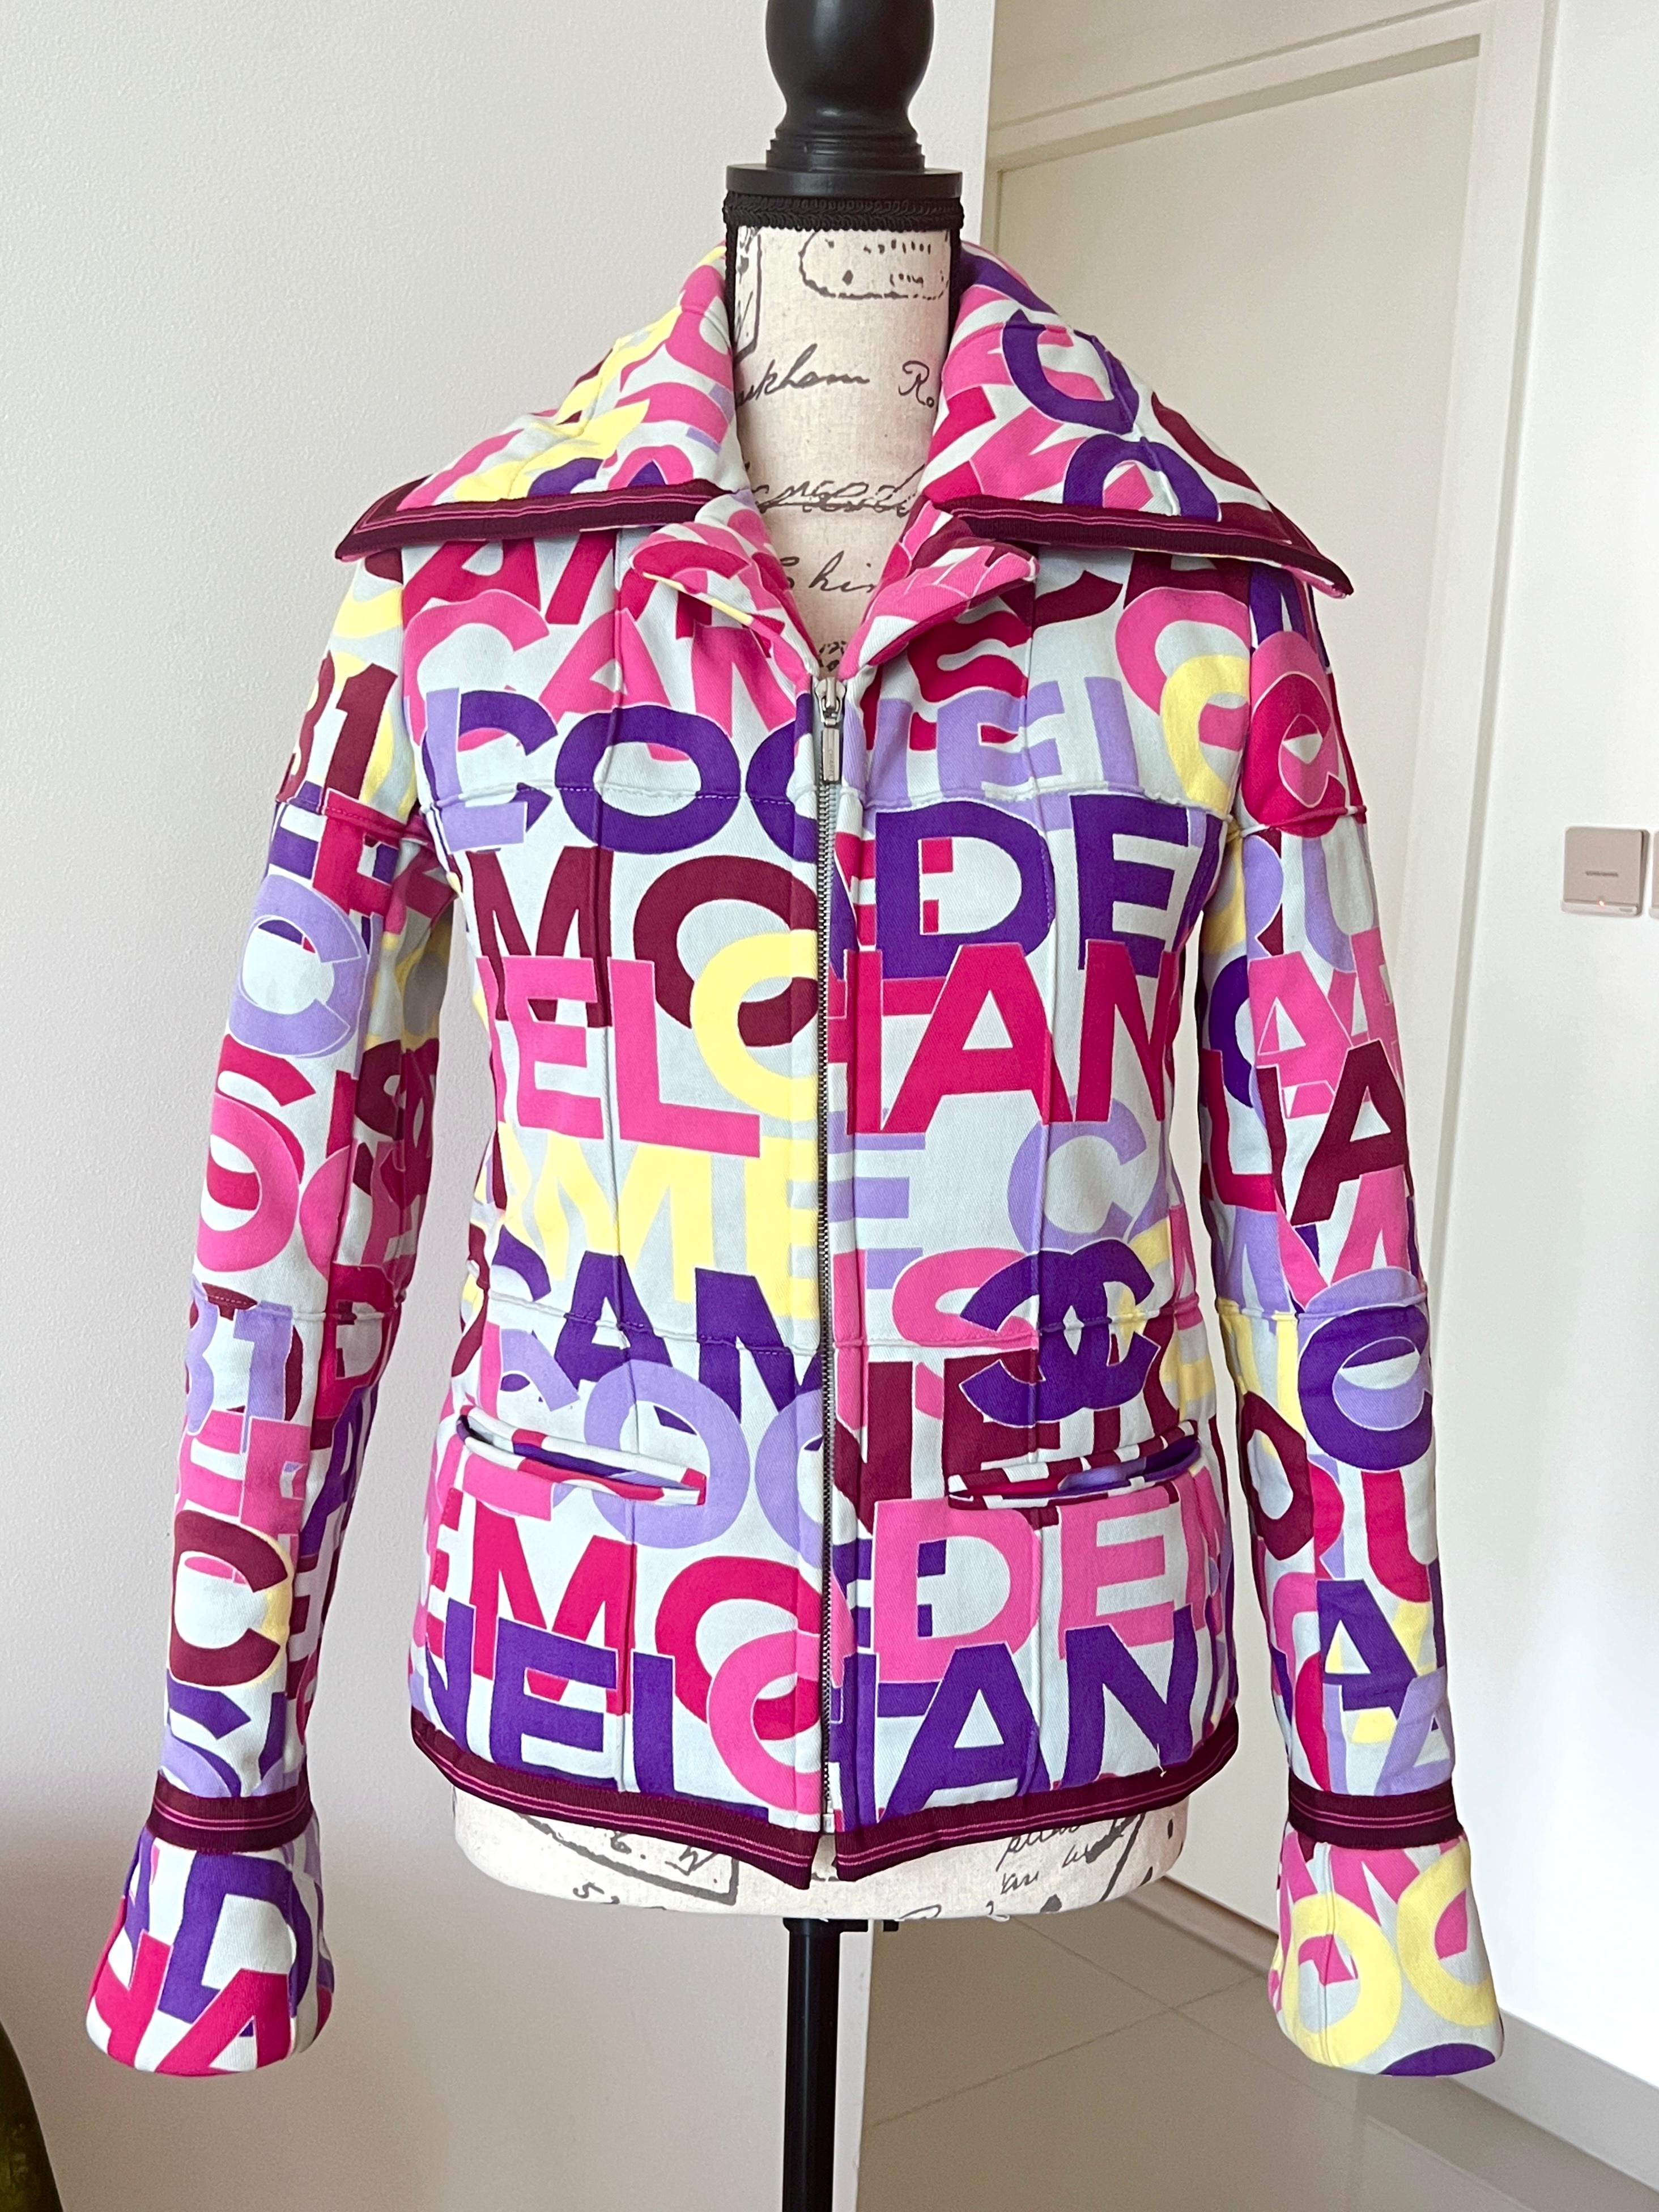 Super rare CHANEL Logo Puffer Jacket featuring
print that spells out CHANEL, COCO & 31 RUE CAMBON
This incredible jacket is made from brushed cotton (with ribbon details). Size mark 36 FR.
Condition is pristine, only tried once.